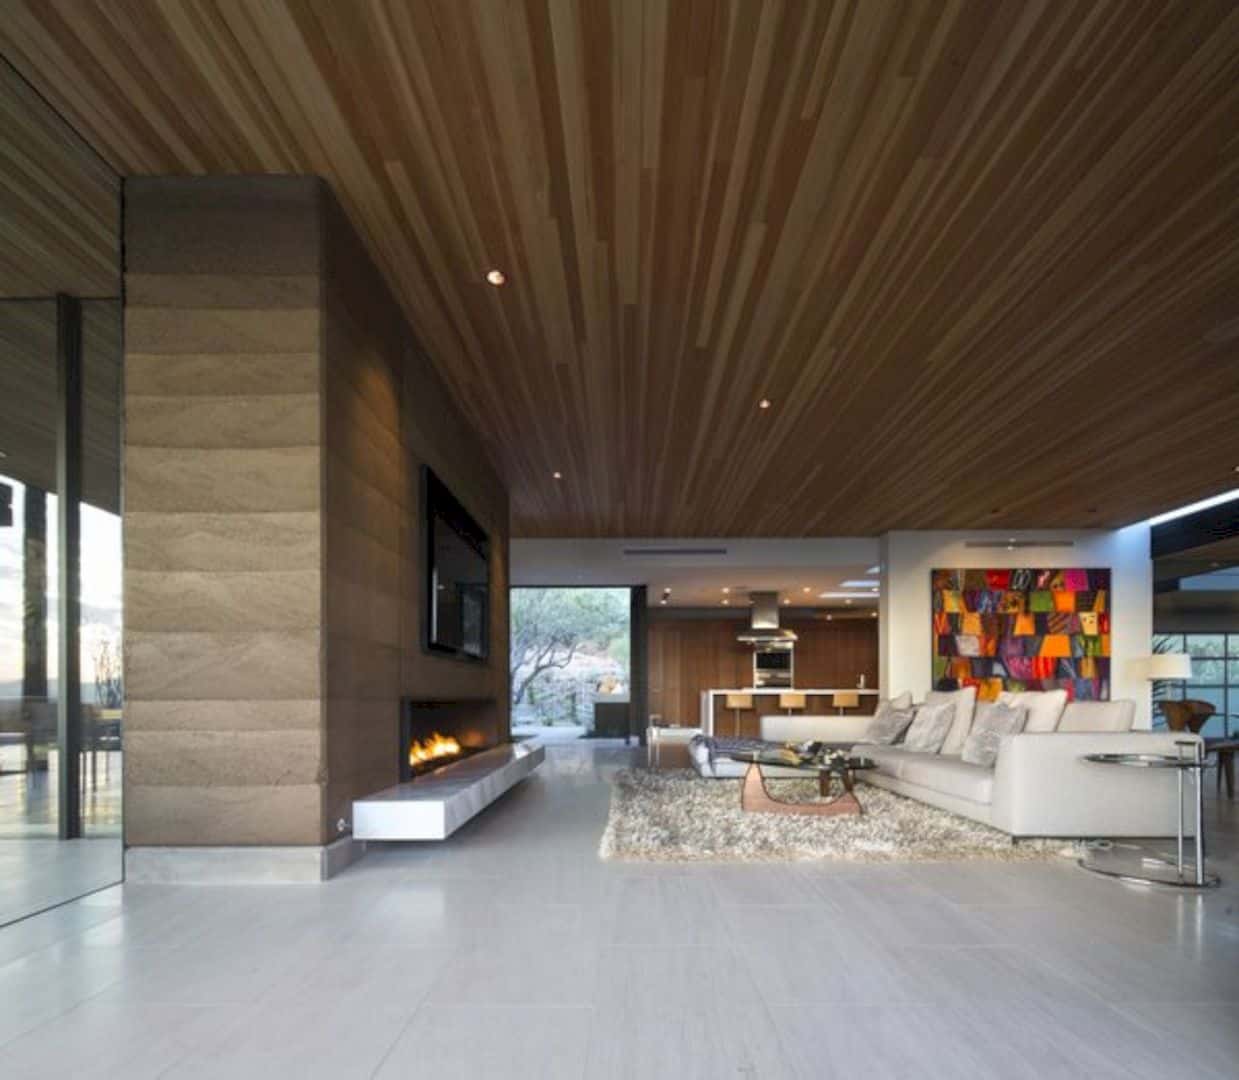 The Rammed Earth Modern Residence A Modest Yet Sophisticated Residence Dominated By Humble Materials 15